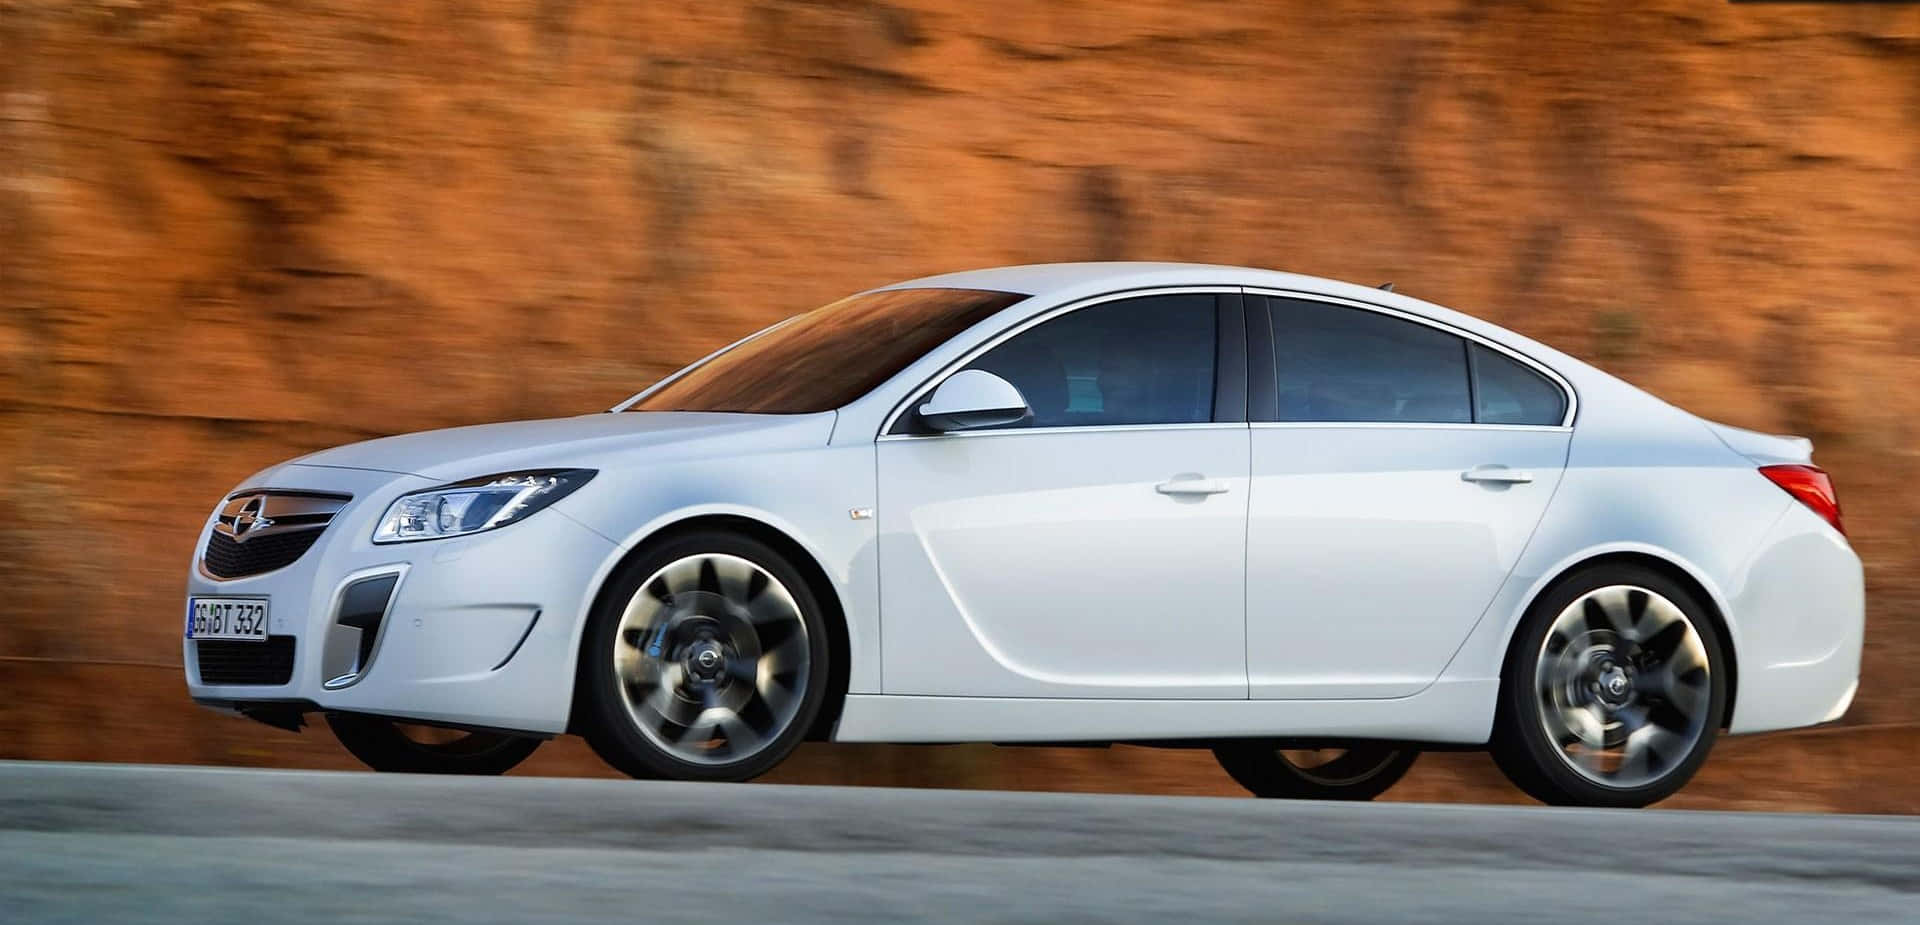 Sleek and Powerful Opel Insignia in Motion Wallpaper